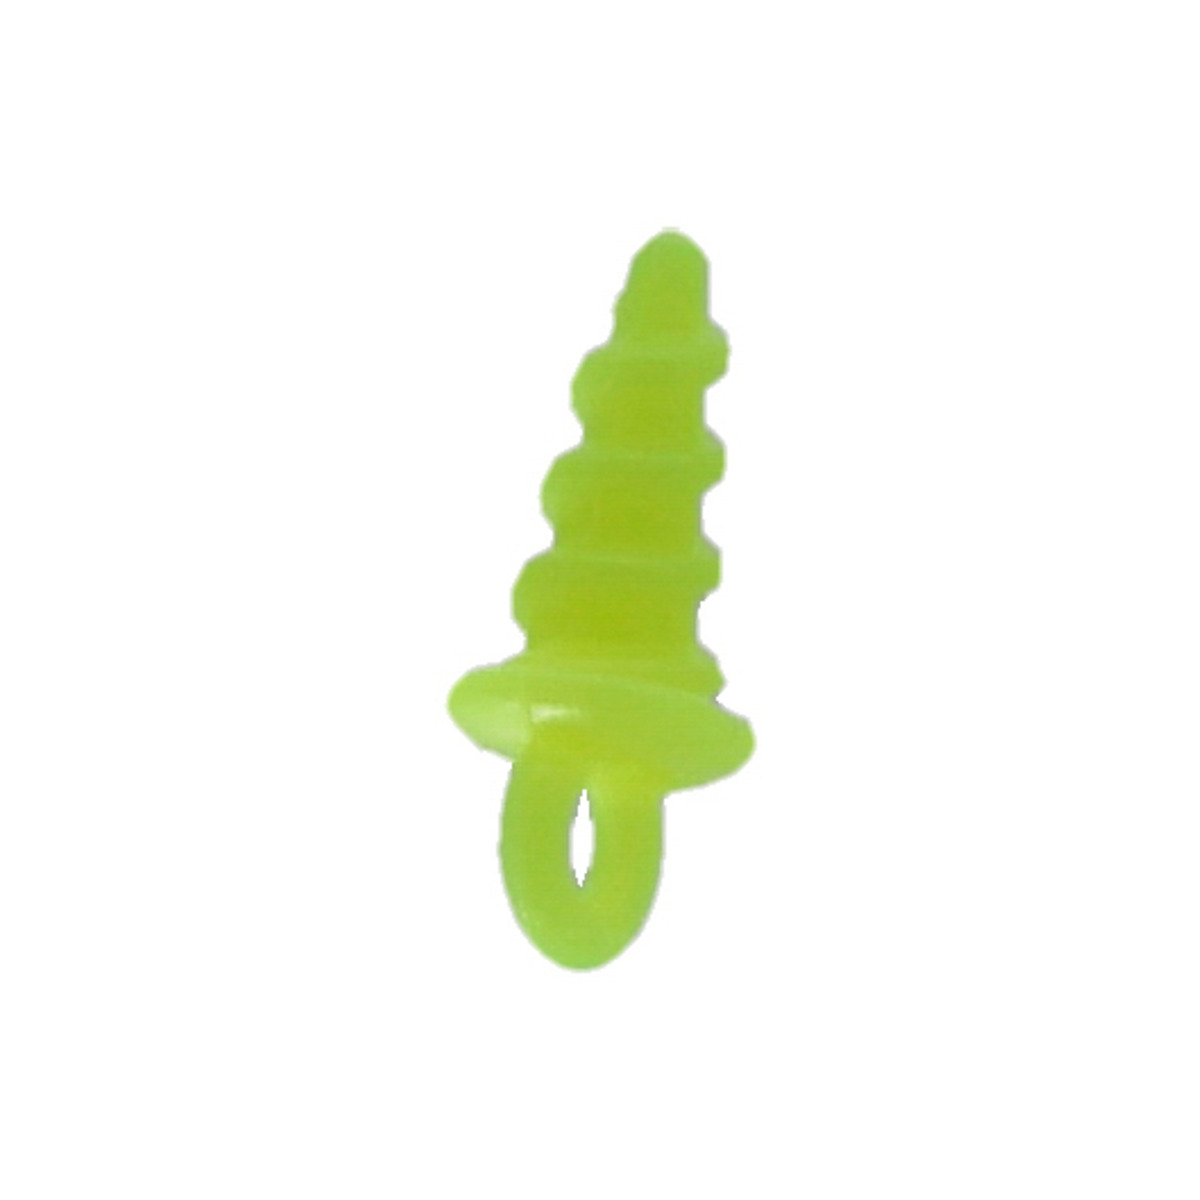 Mikado Screw - FOR BOILIES PLASTIC  11mm  YELLOW